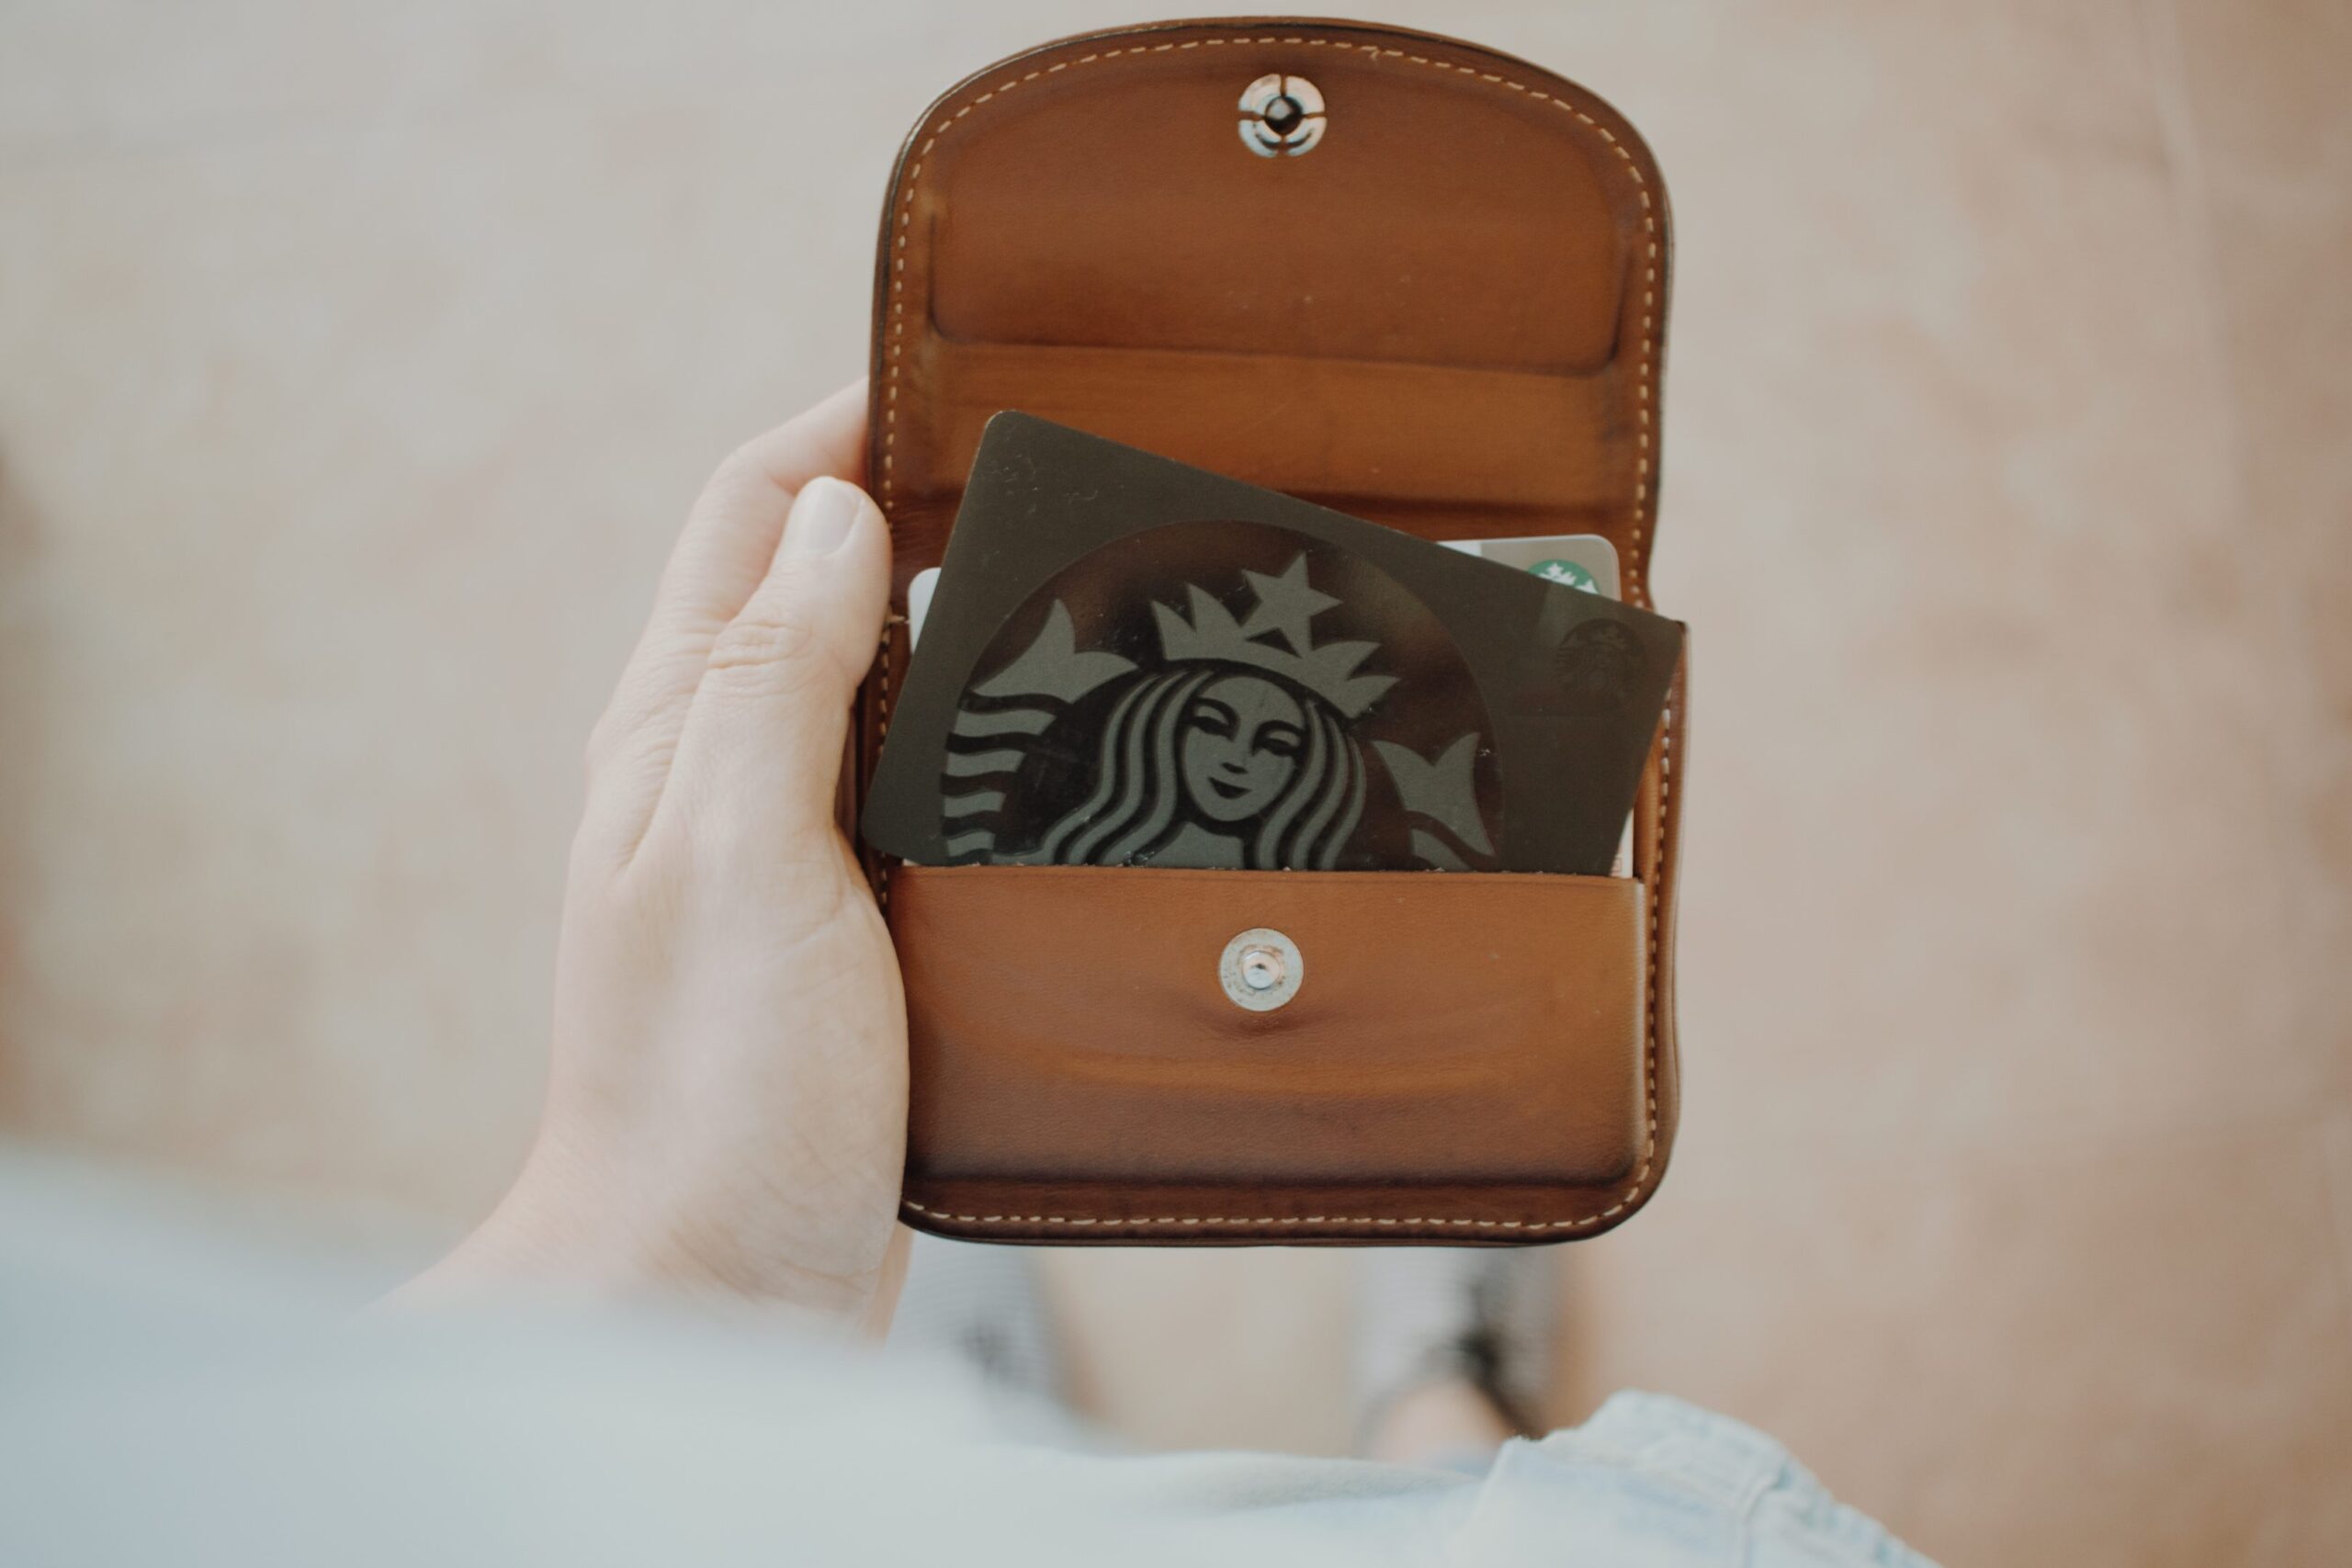 Starbucks gift card inside brown leather wallet